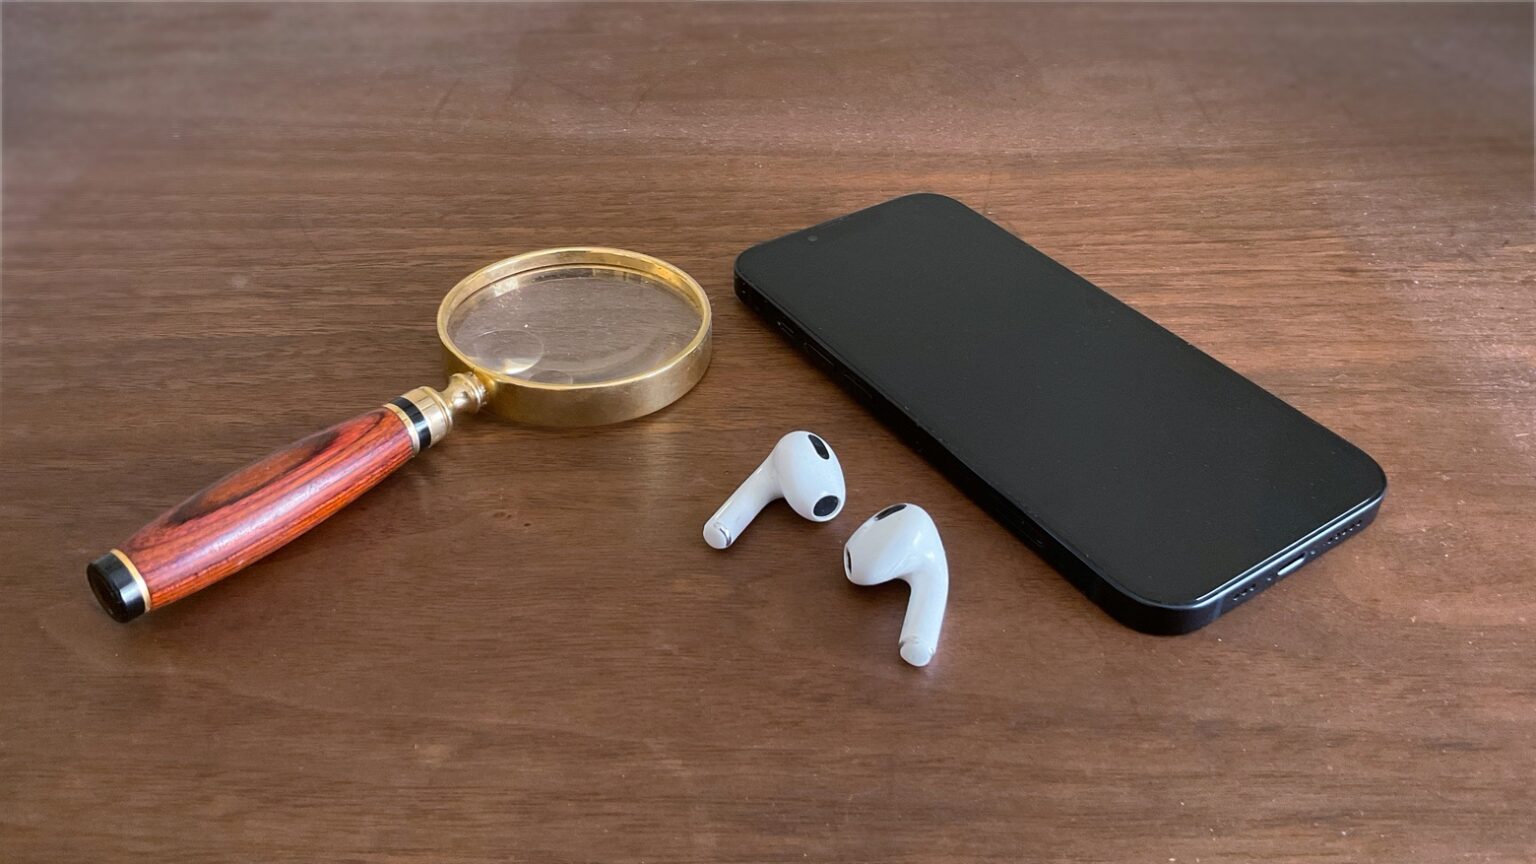 How to use your iPhone and AirPods to spy on people